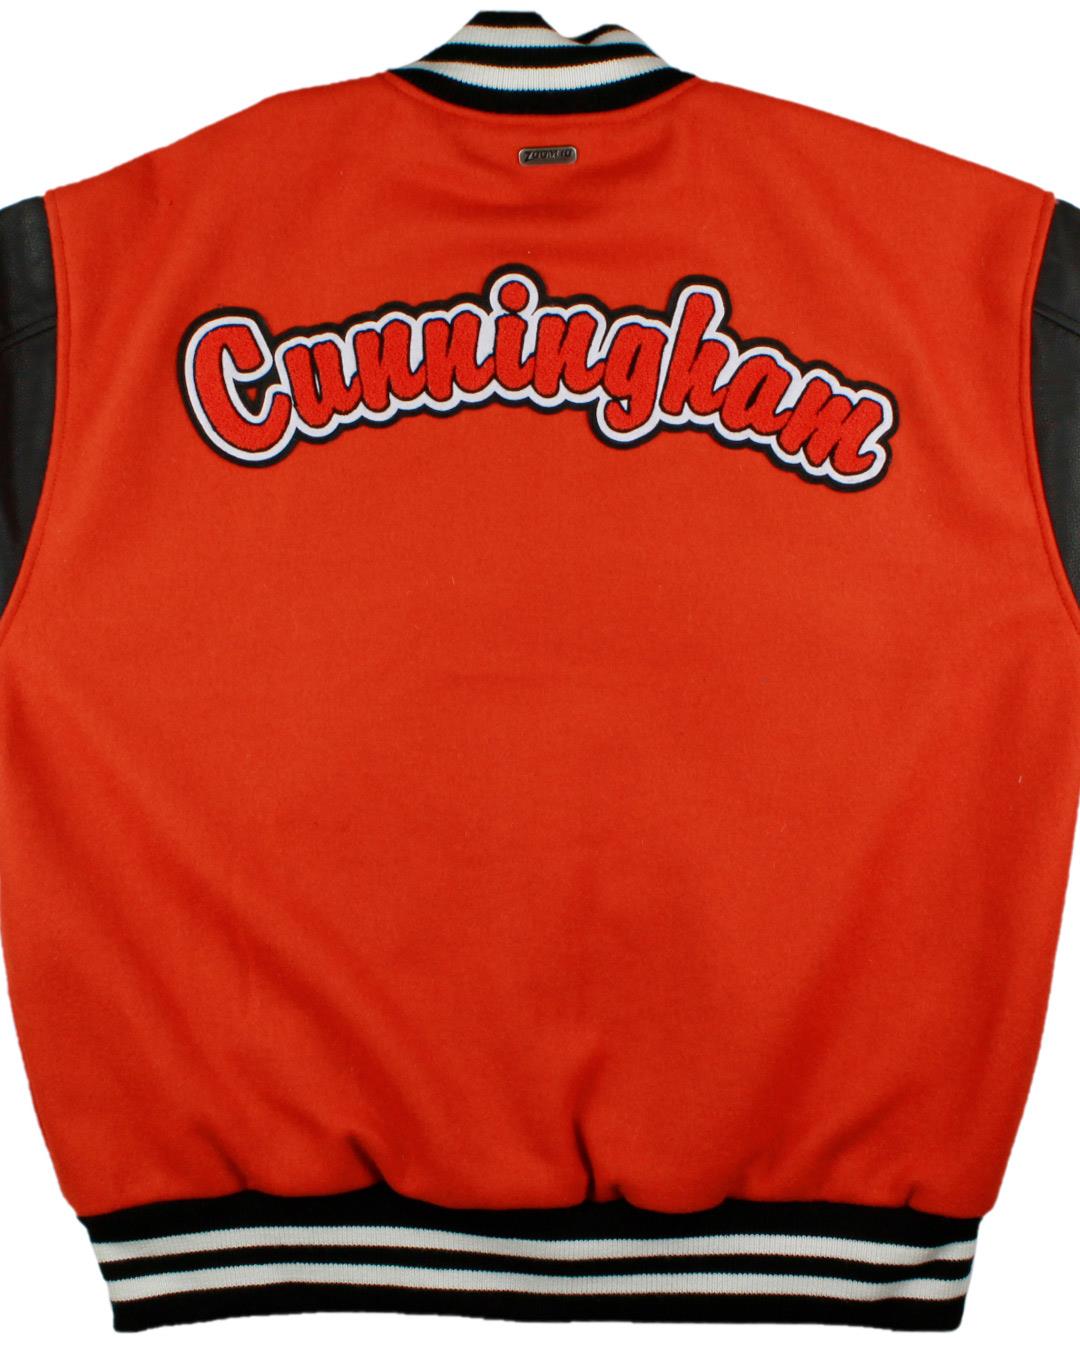 Cooperstown High School Letterman, Cooperstown, NY - Back